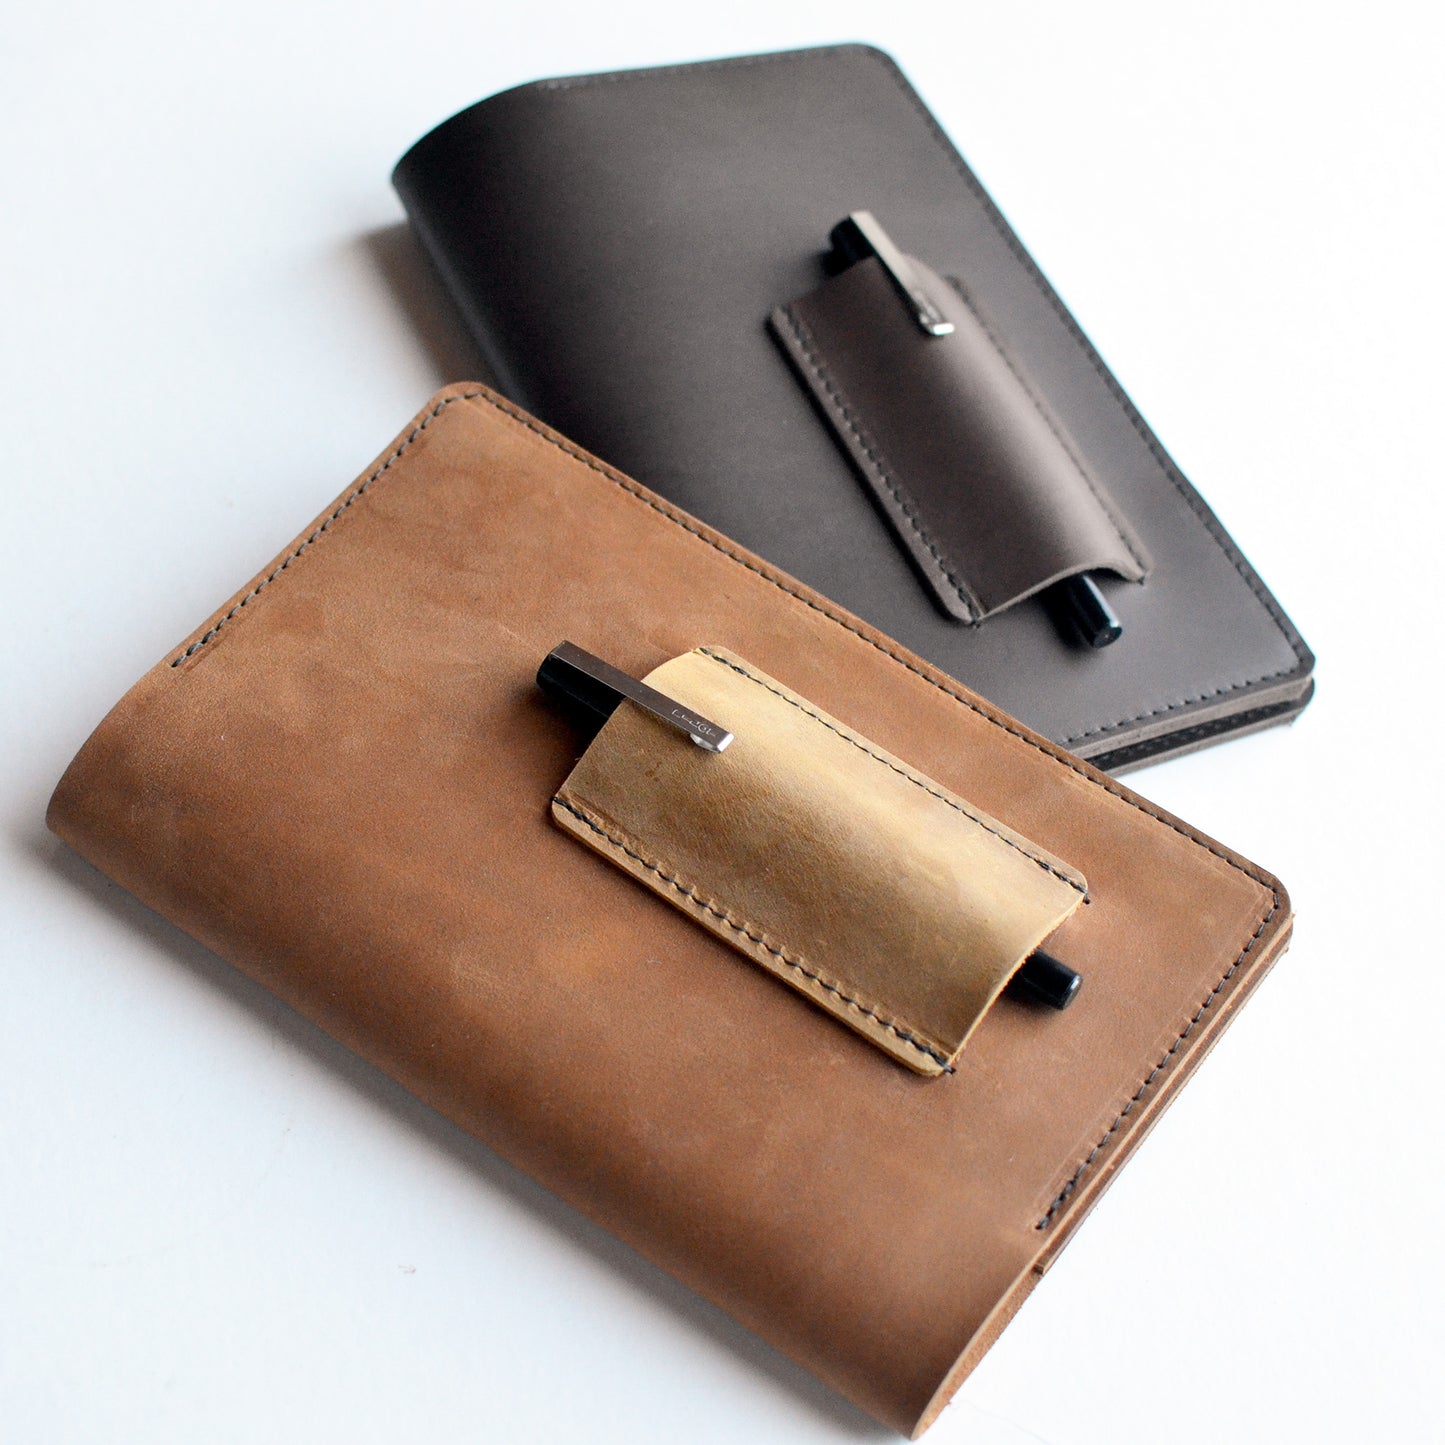 Refillable Leather Journal + Pen - Dark Brown Leather